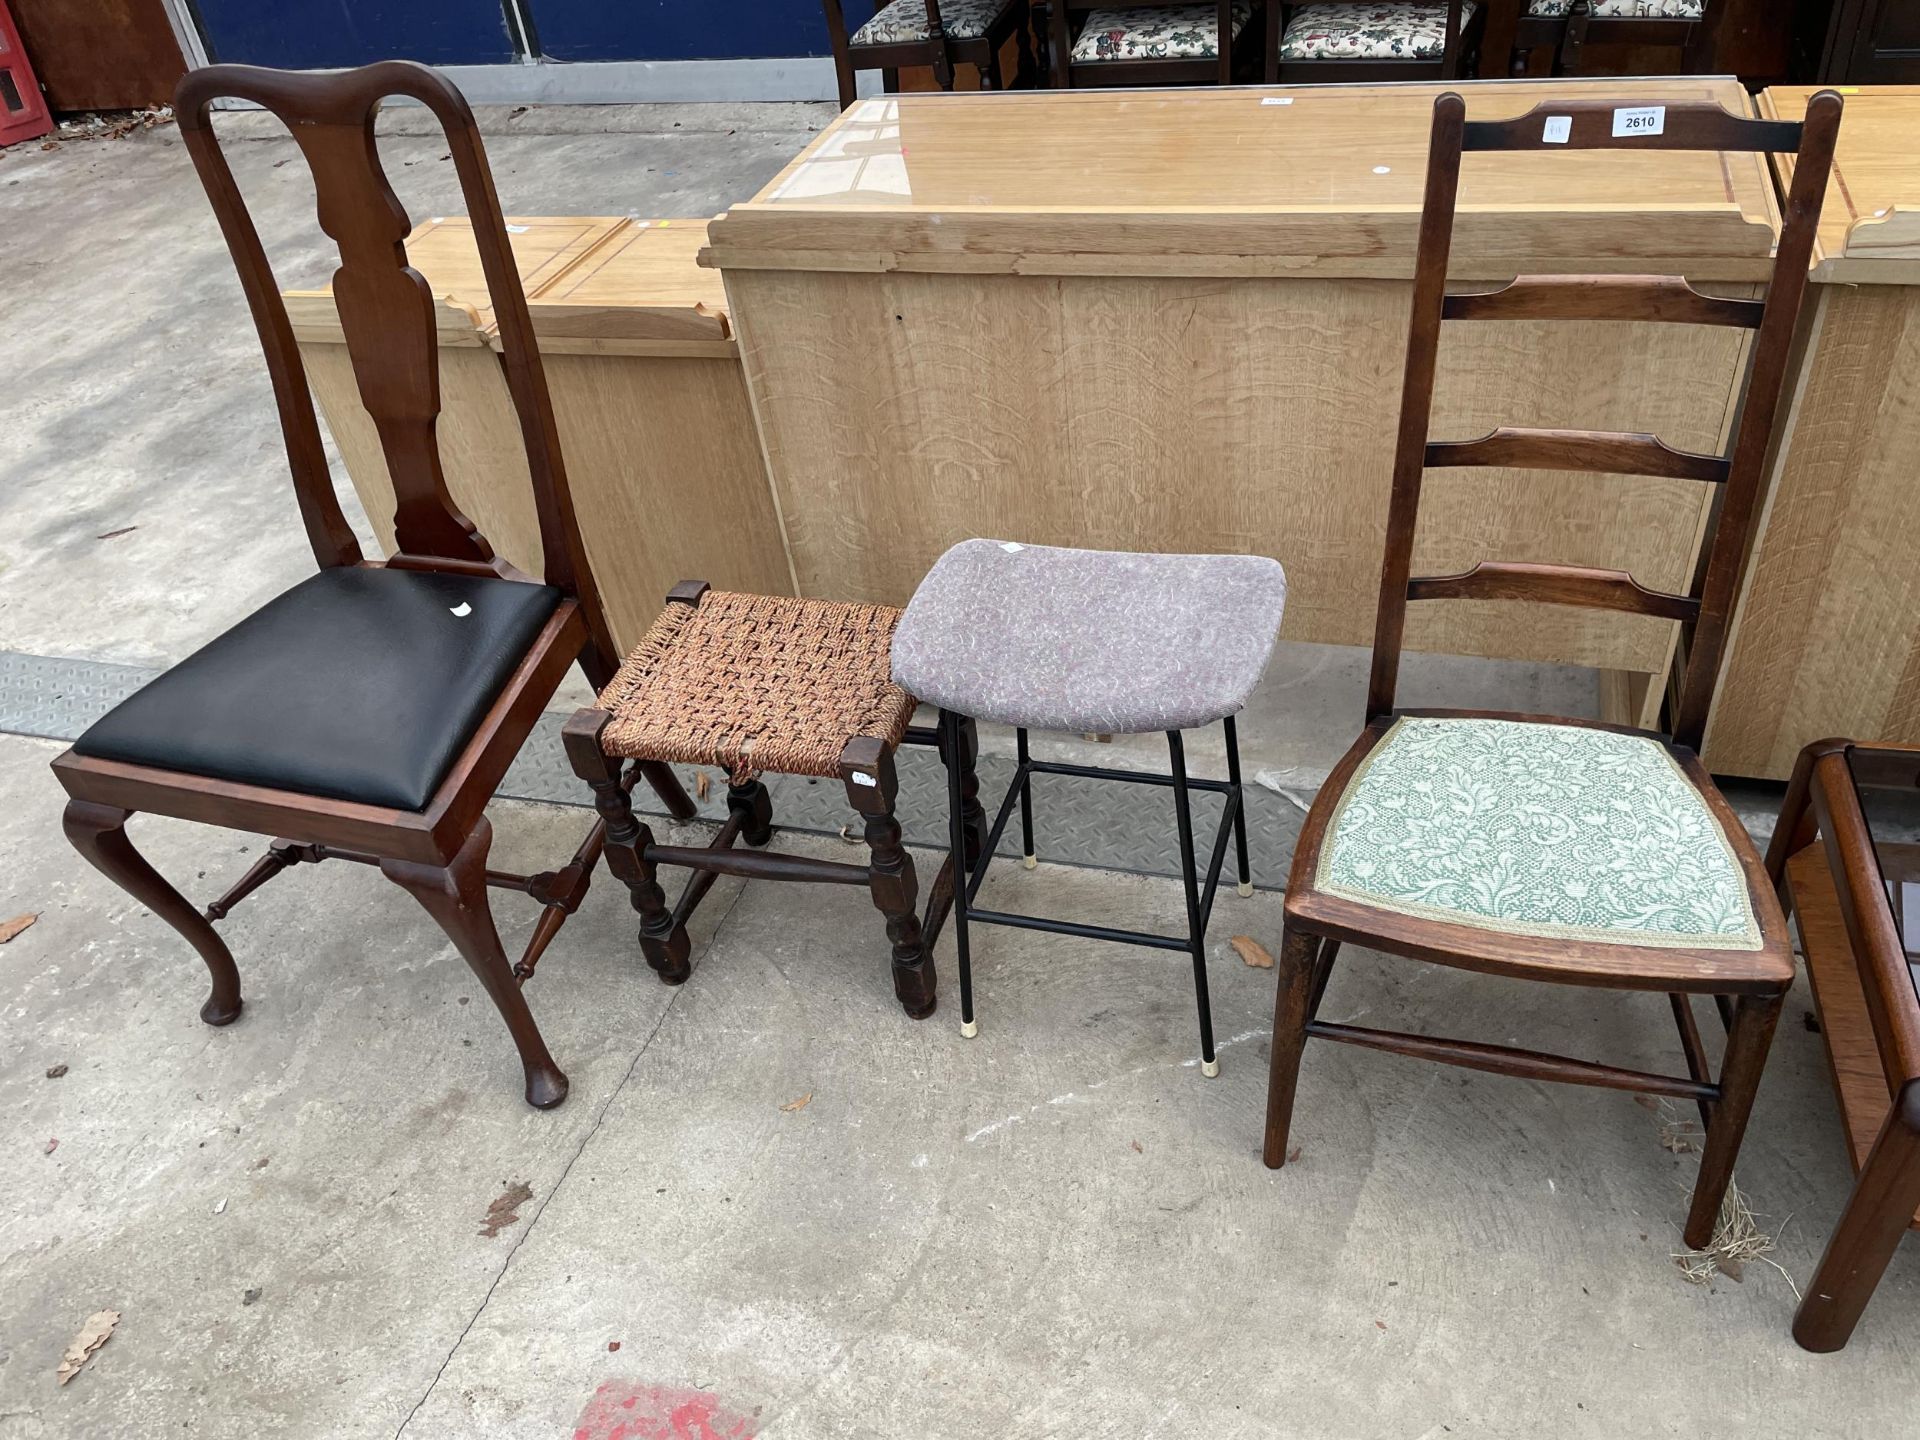 A BEDROOM CHAIR, QUEEN ANNE STYLE DINING CHAIR AND TWO STOOLS